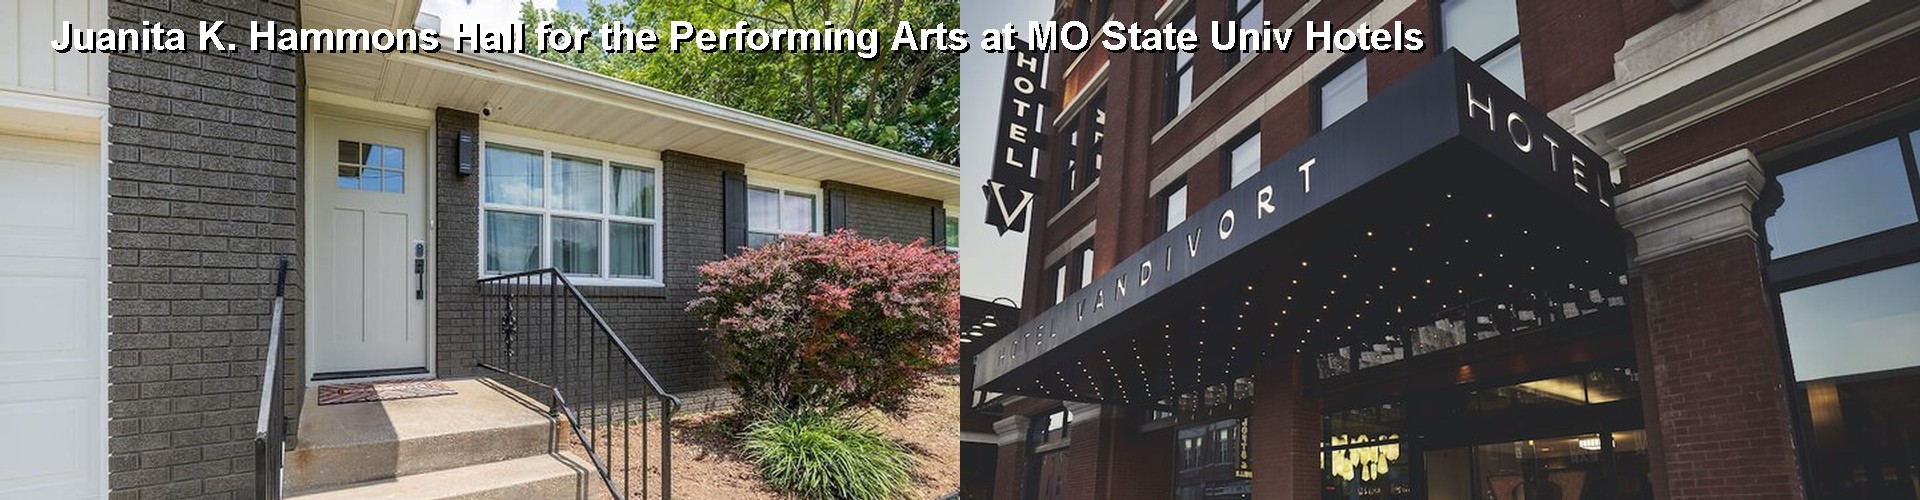 5 Best Hotels near Juanita K. Hammons Hall for the Performing Arts at MO State Univ